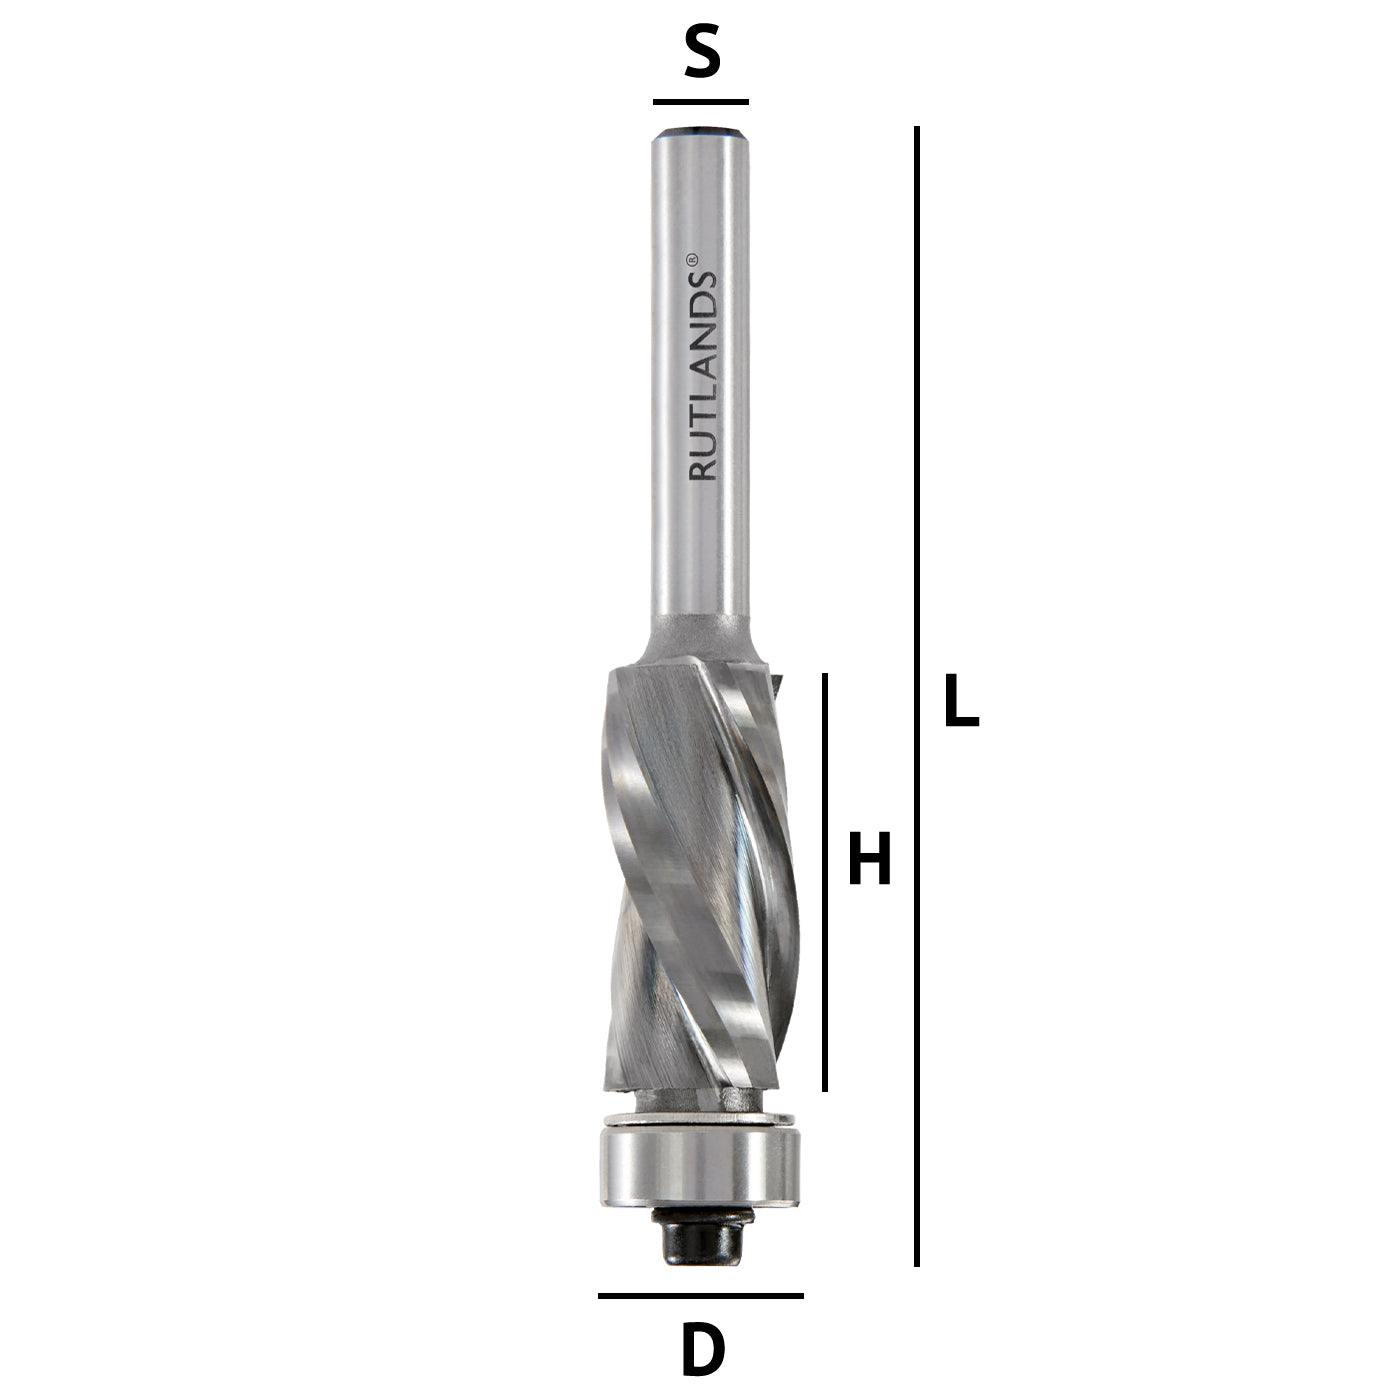 Solid Carbide - Spiral Down Cut 2 Flute with Bottom Bearing - D=12.7mm H=25mm L=72mm S=1/4"